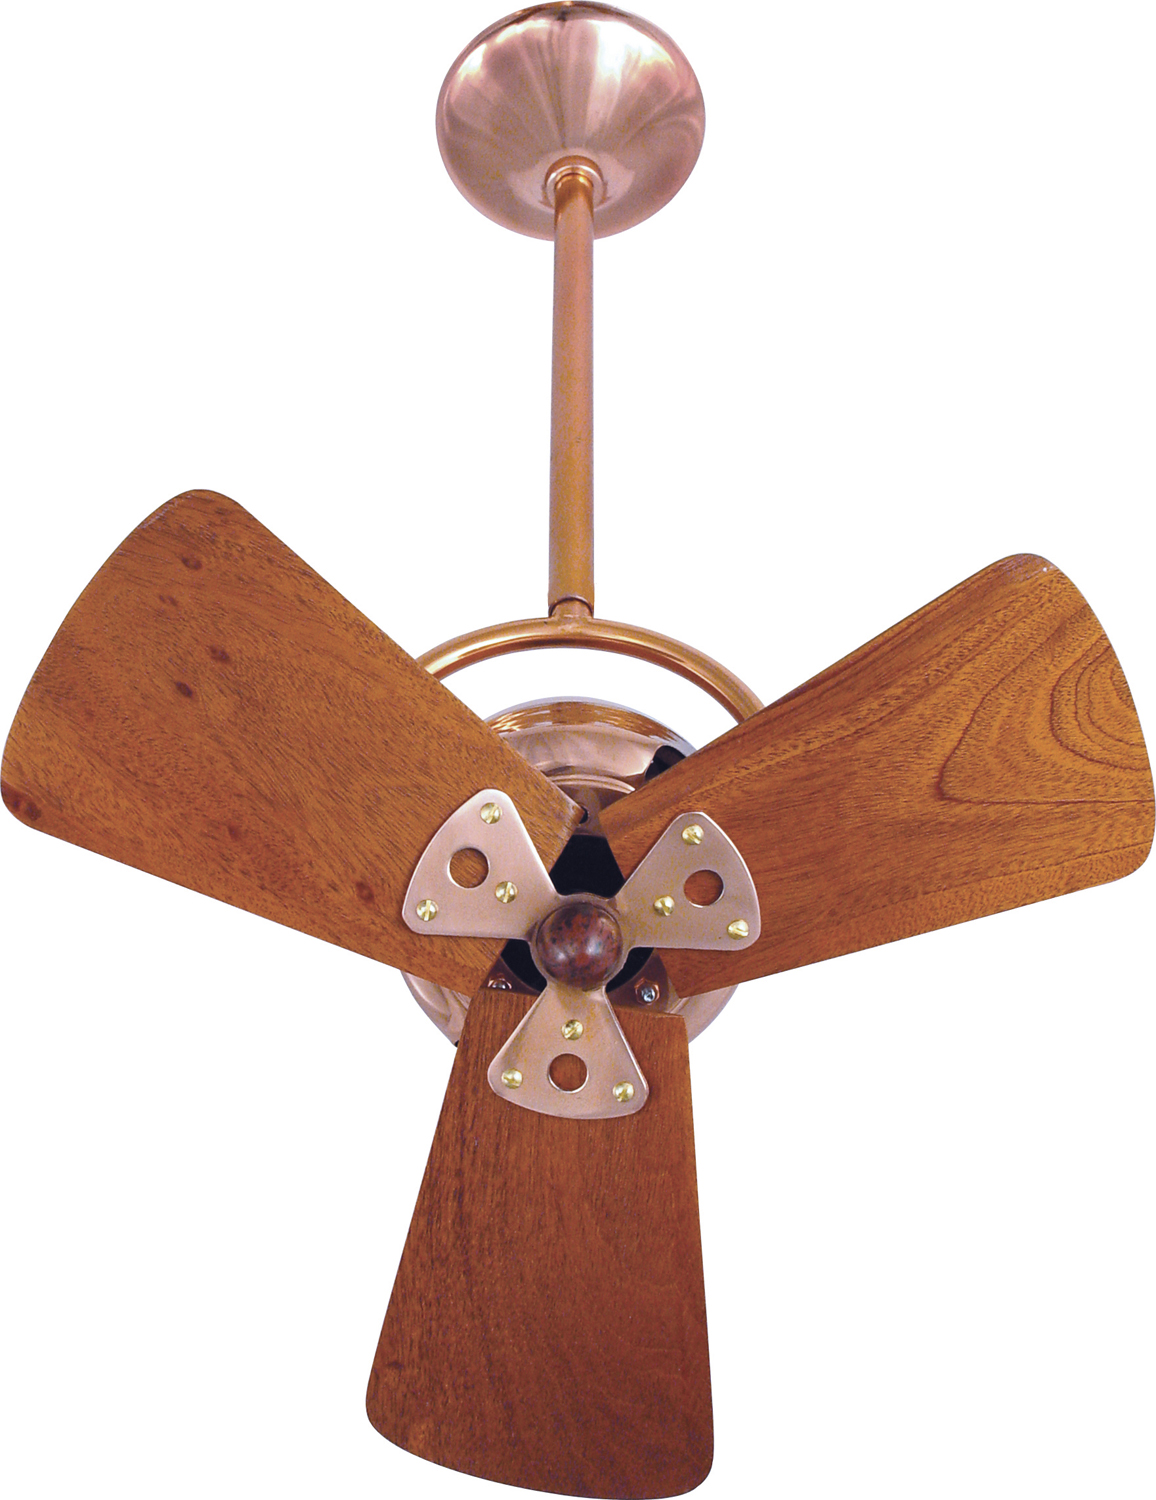 Bianca Direcional ceiling fan in Polished Copper with Mahogany wood blades made by Matthews Fan Company.